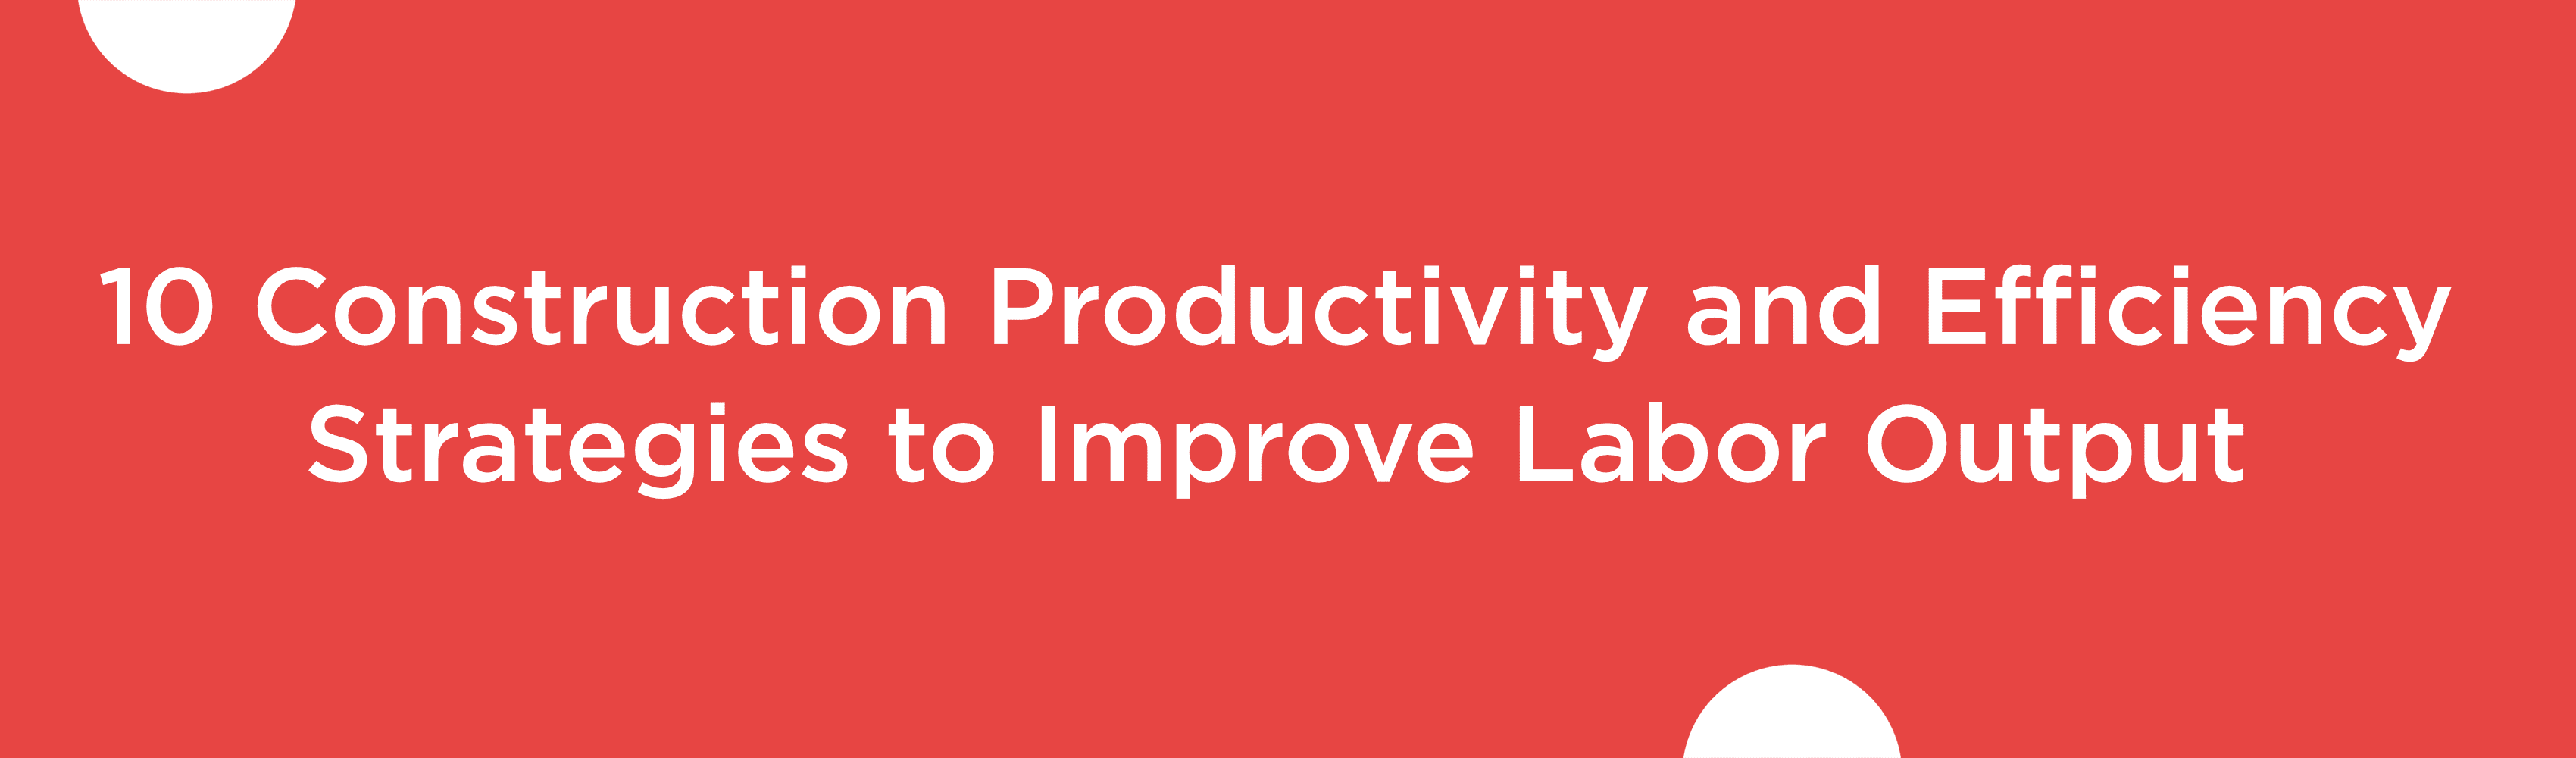 10 Construction Productivity and Efficiency Strategies To Improve Labor Output